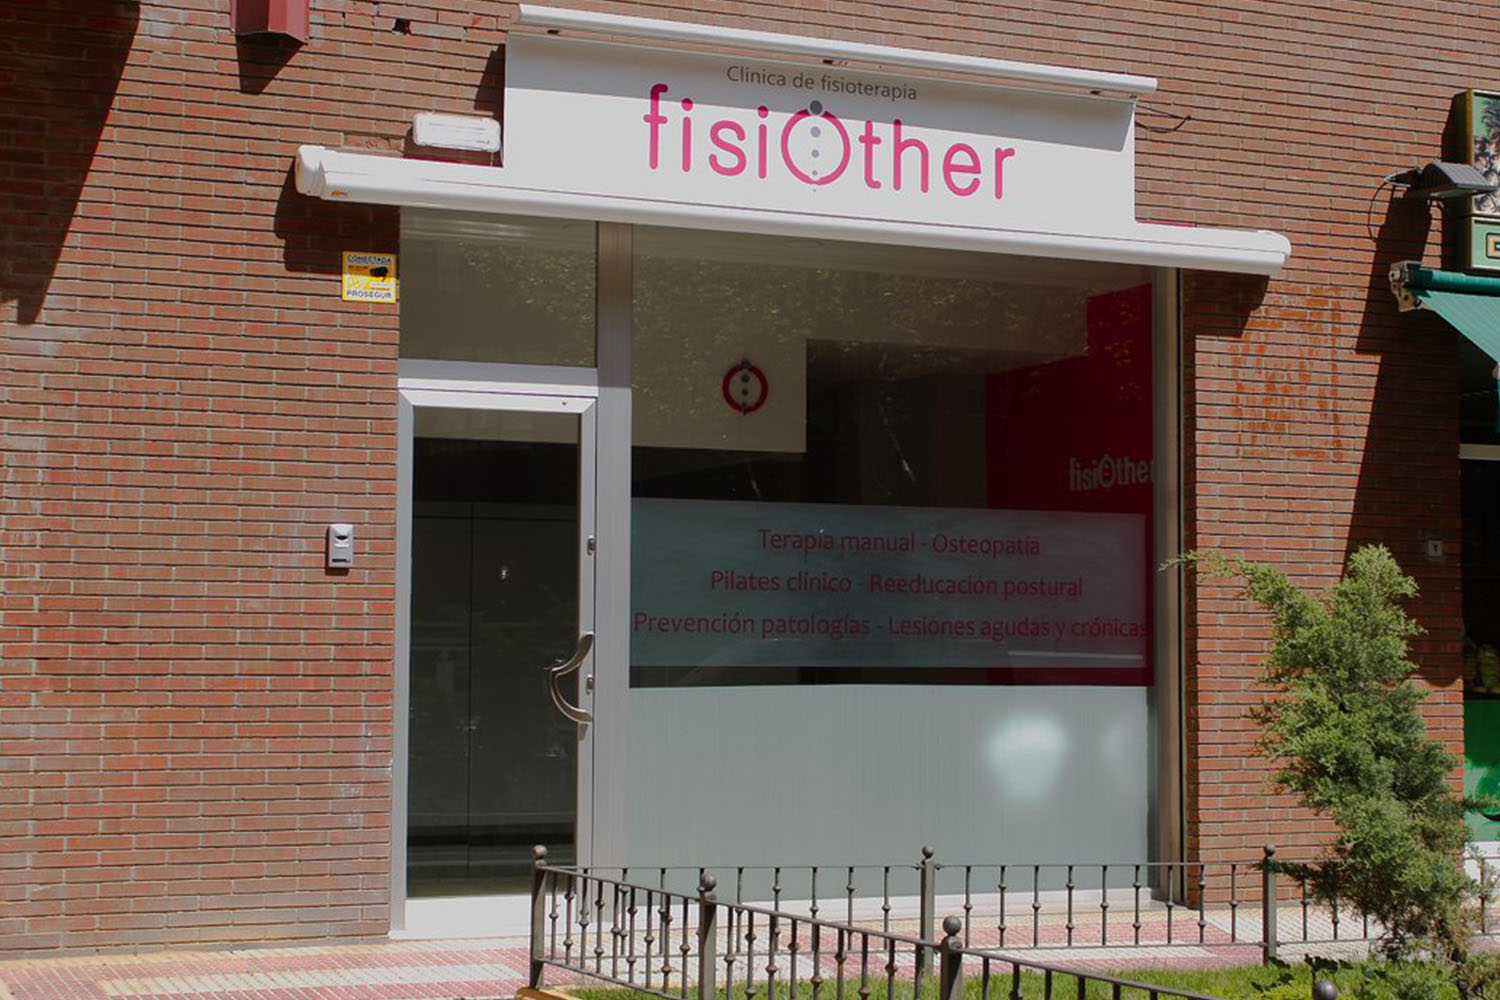 fisiother-2